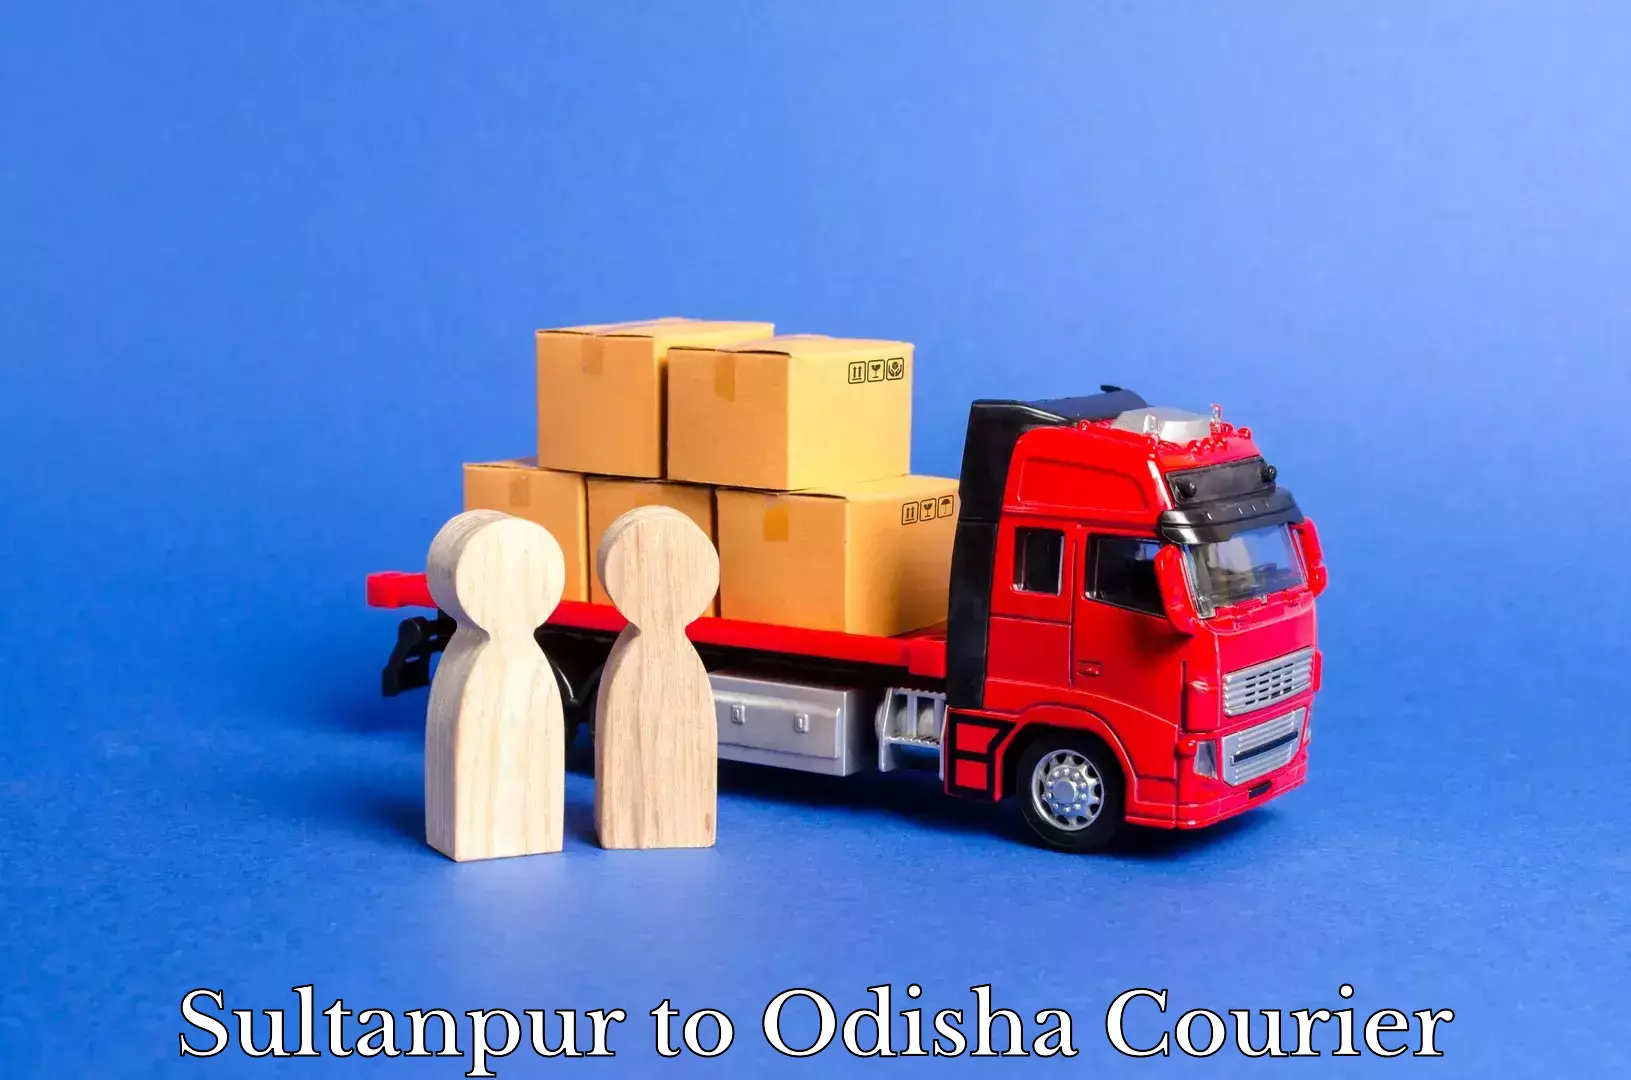 Secure packaging Sultanpur to Odisha